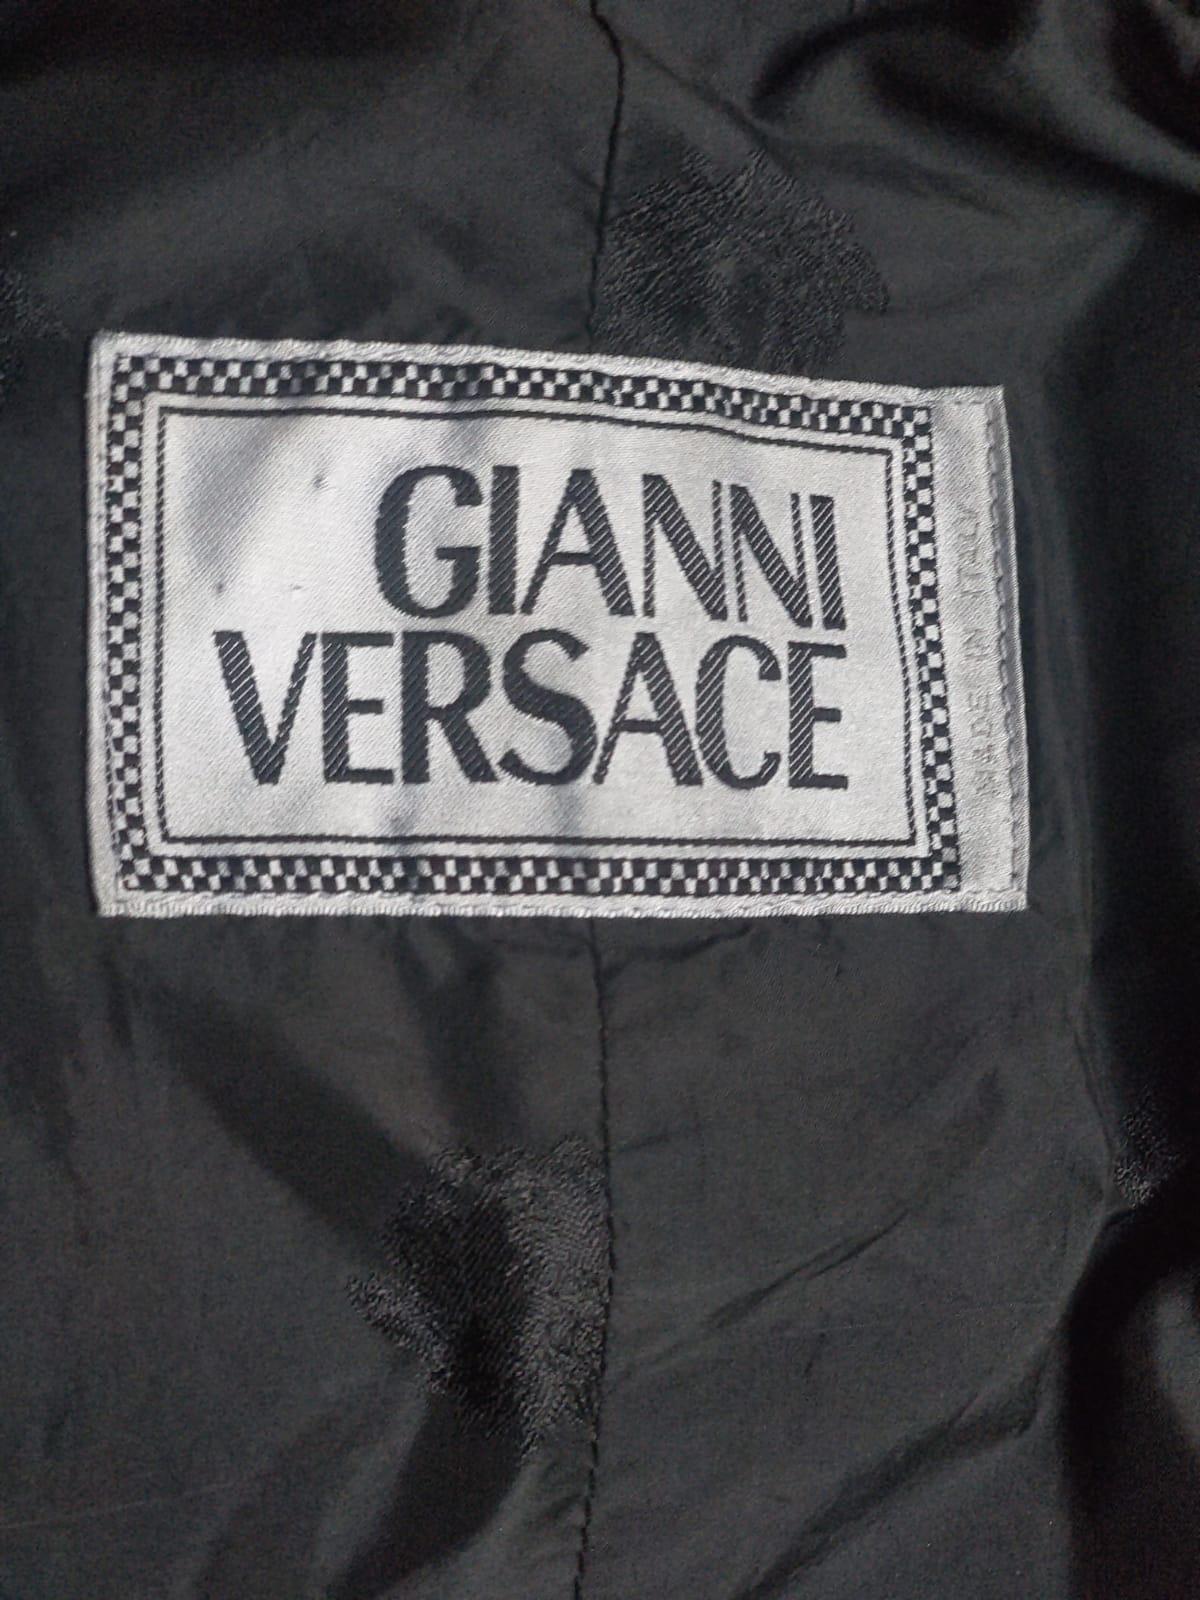 Gianni Versace Leather Blazer with Chain Stitching For Sale 11